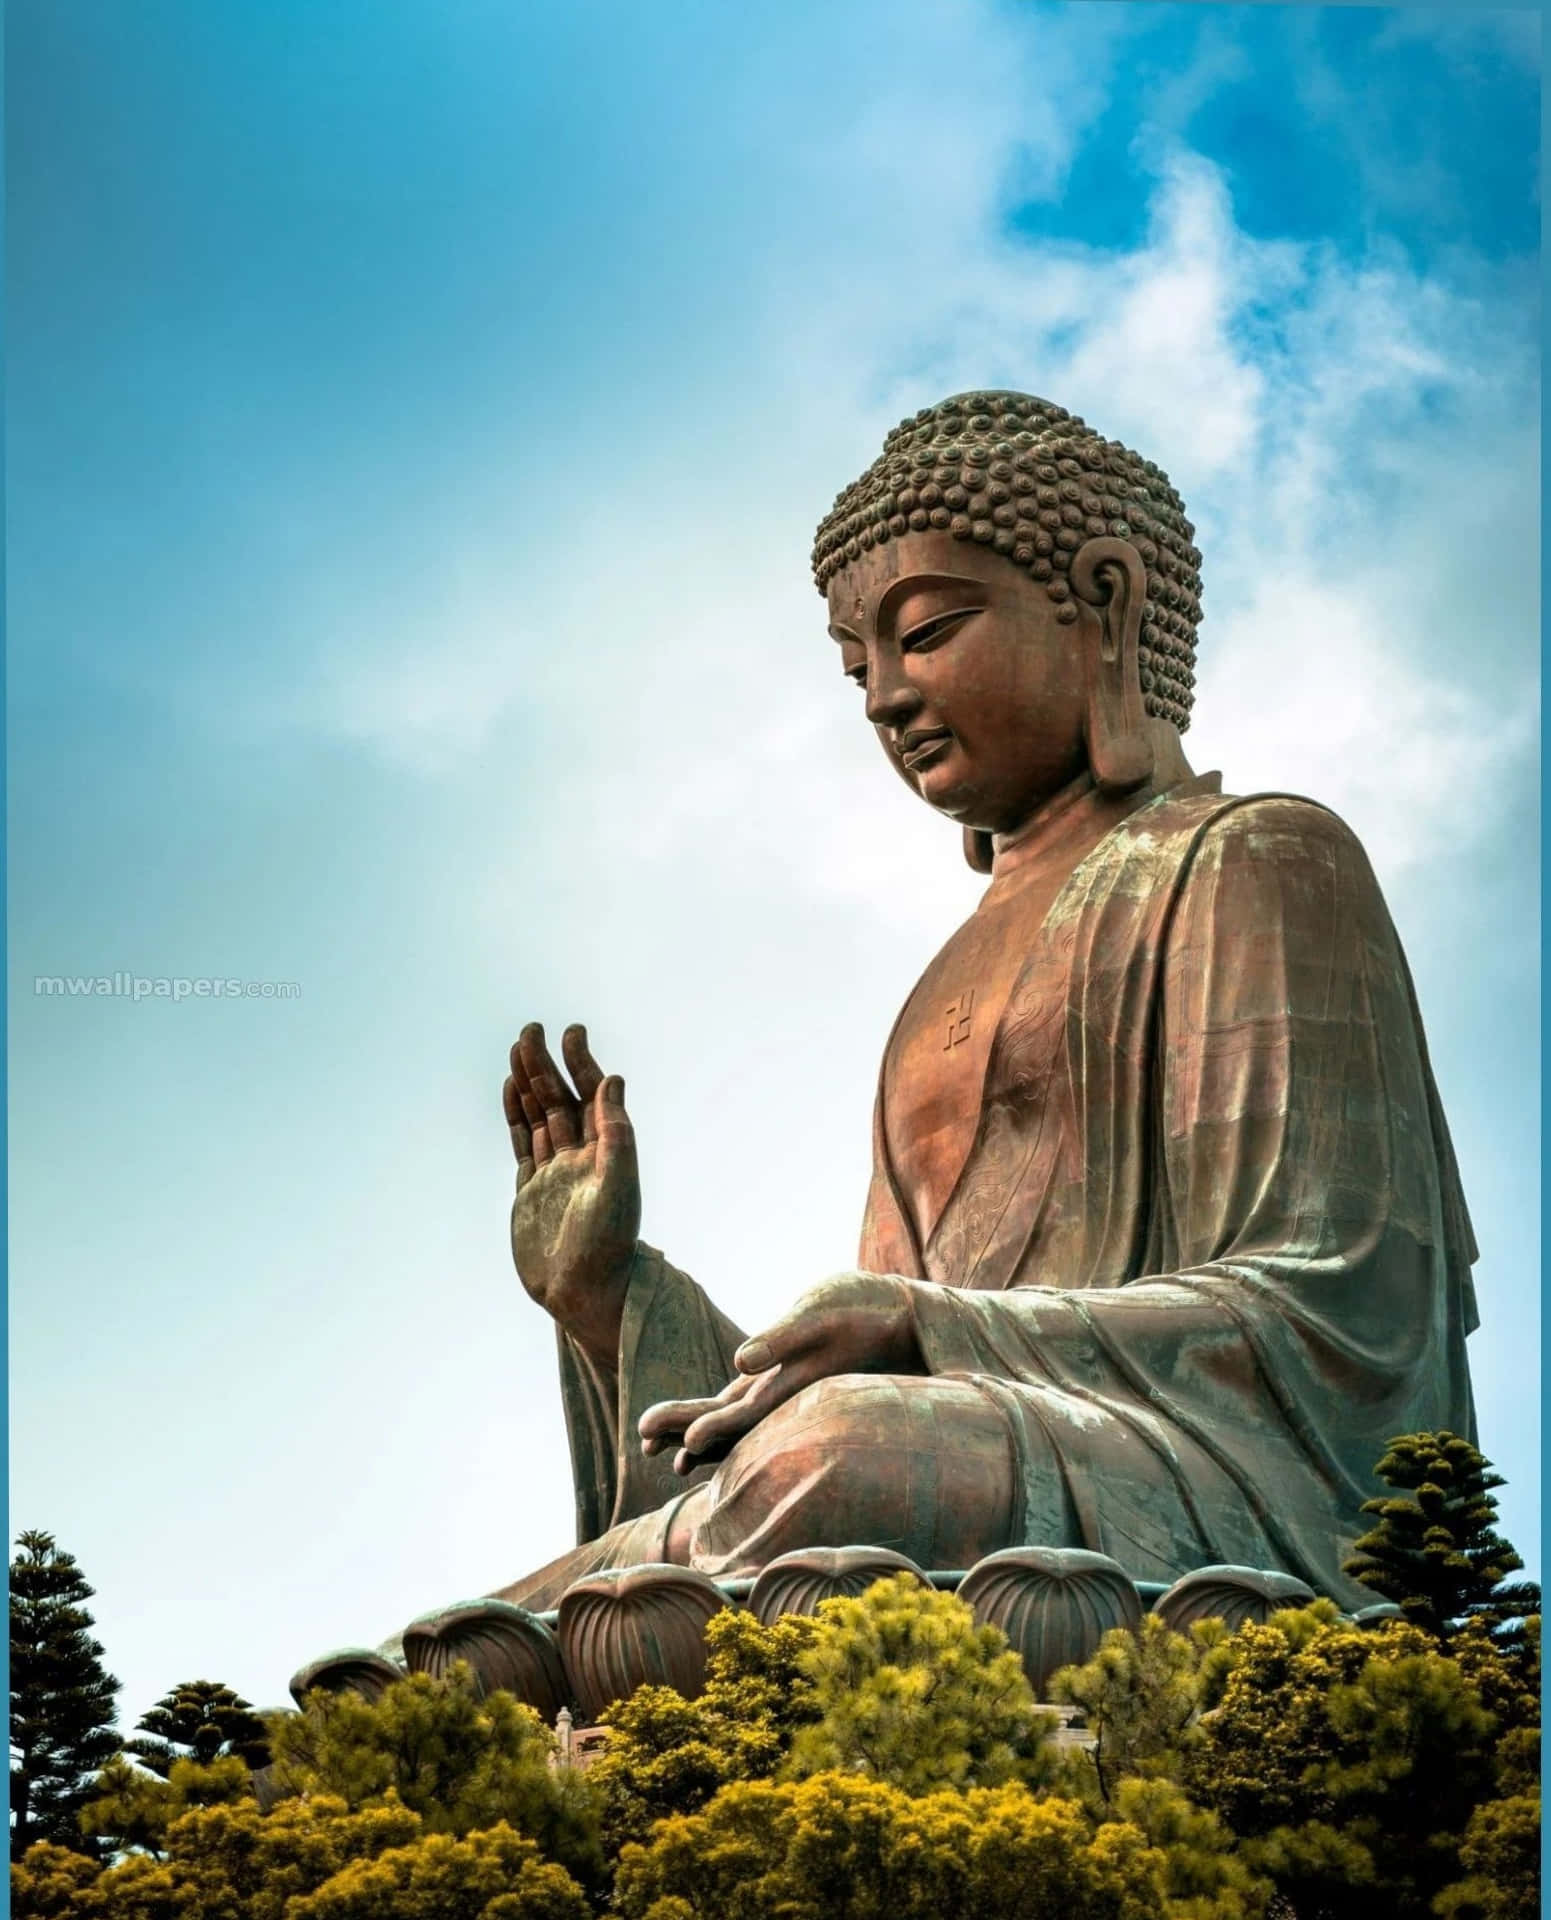 A Large Buddha Statue Is Sitting In The Middle Of A Forest